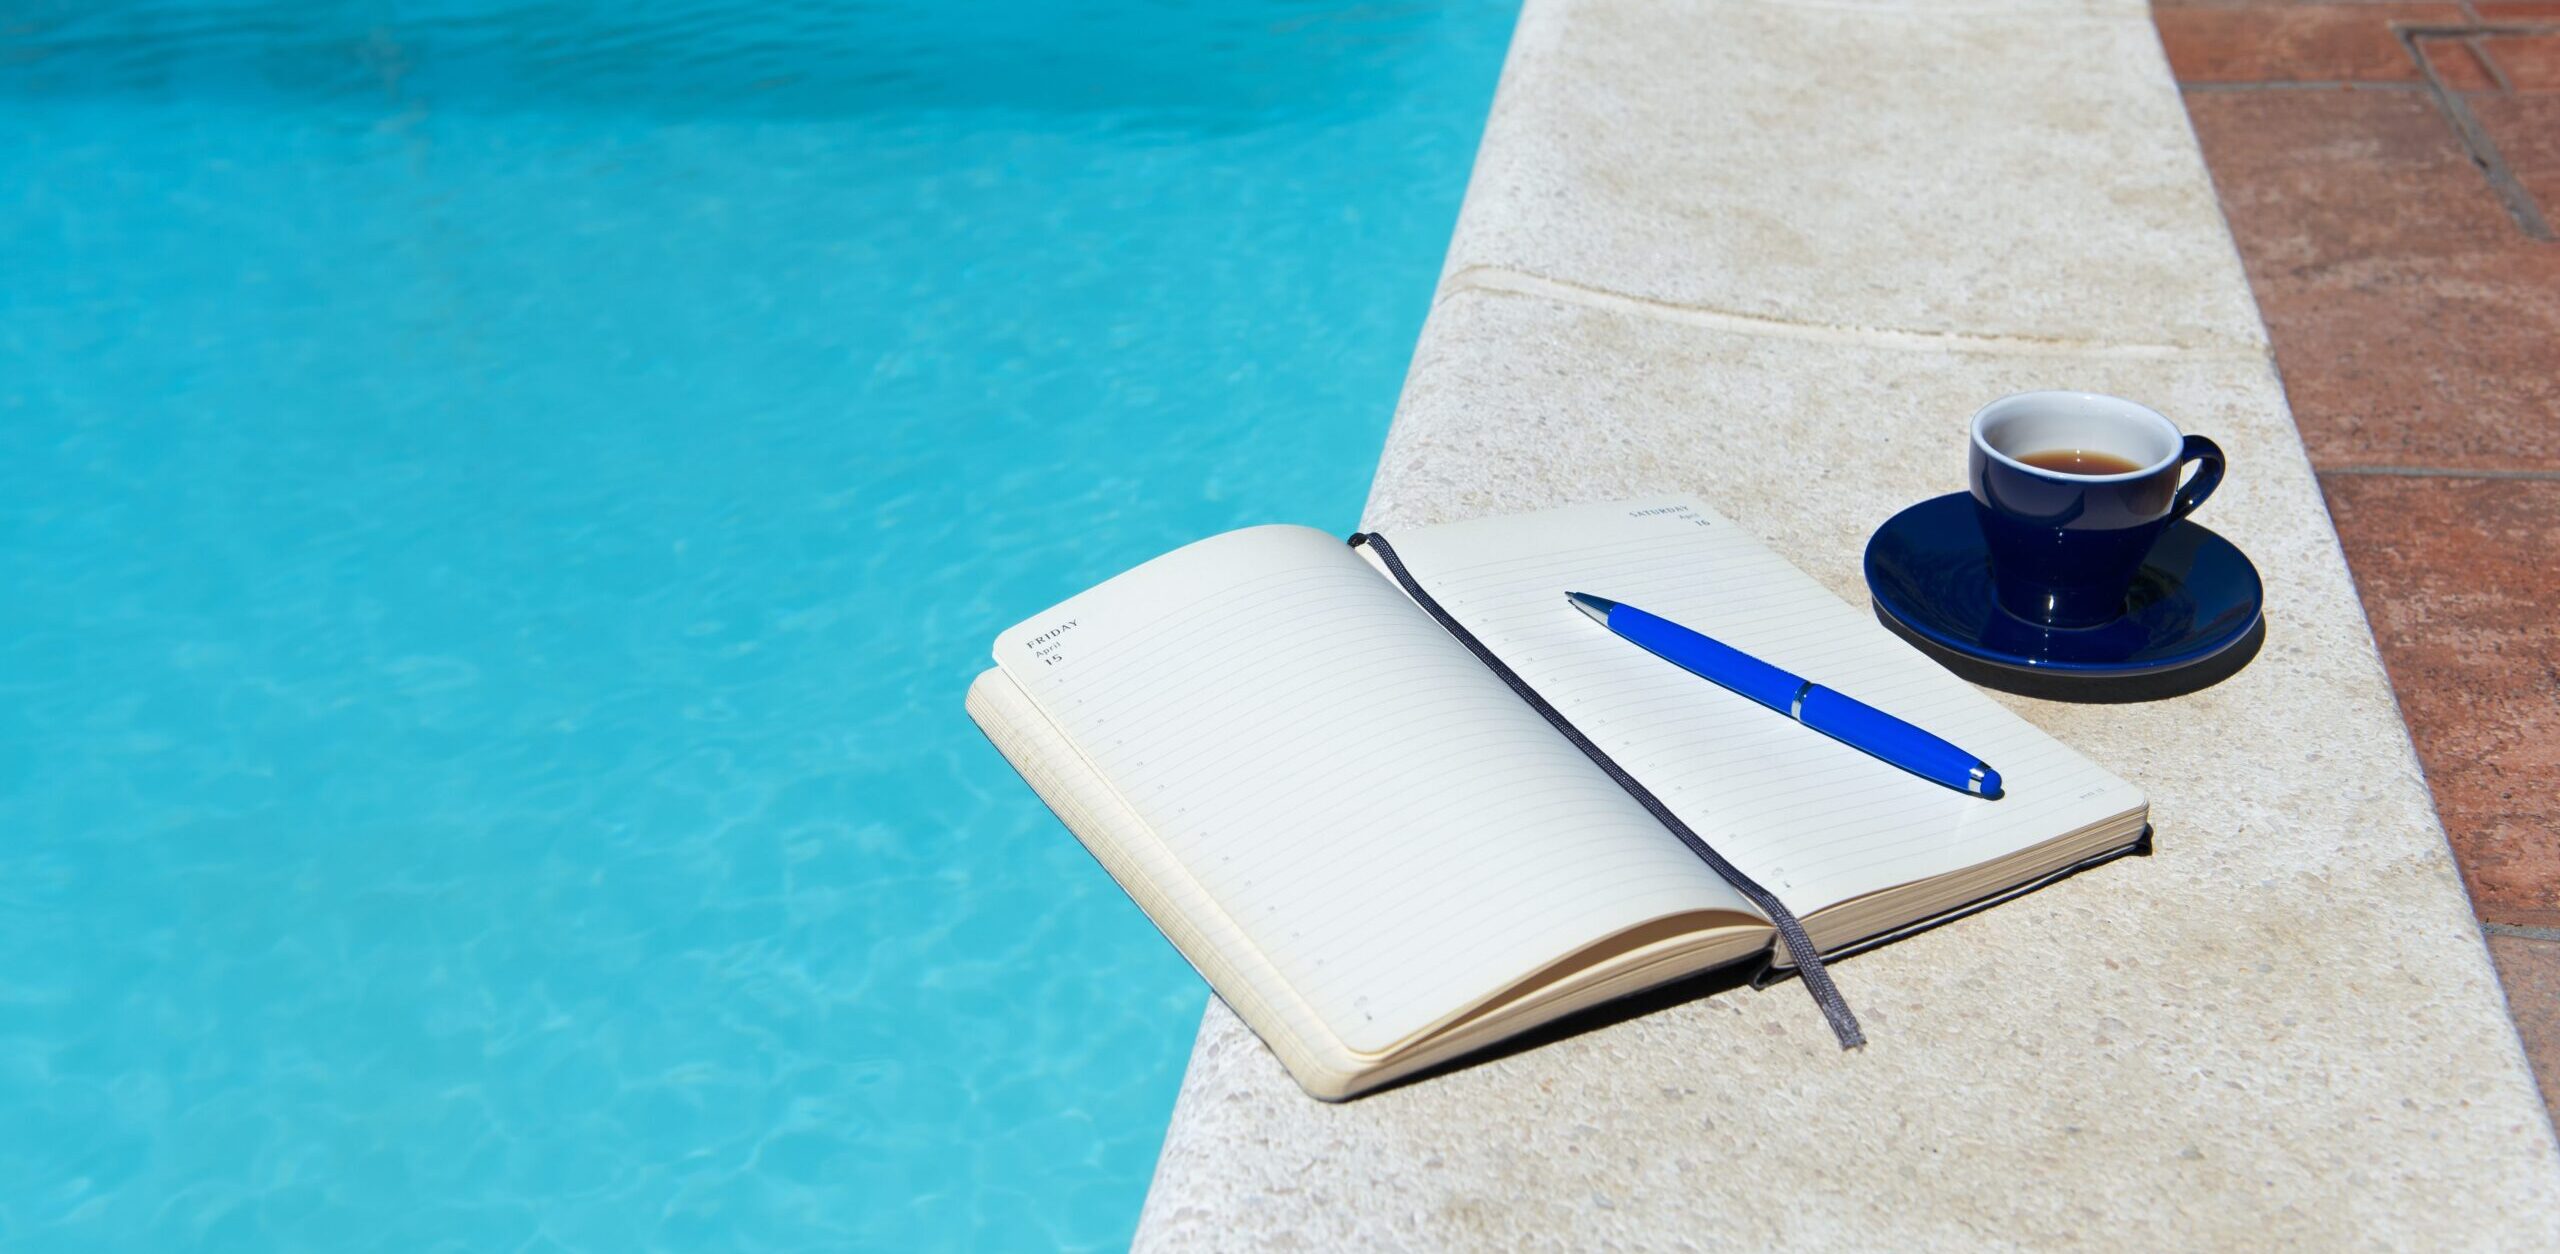 Travel Journal and Cup of Coffee by Pool